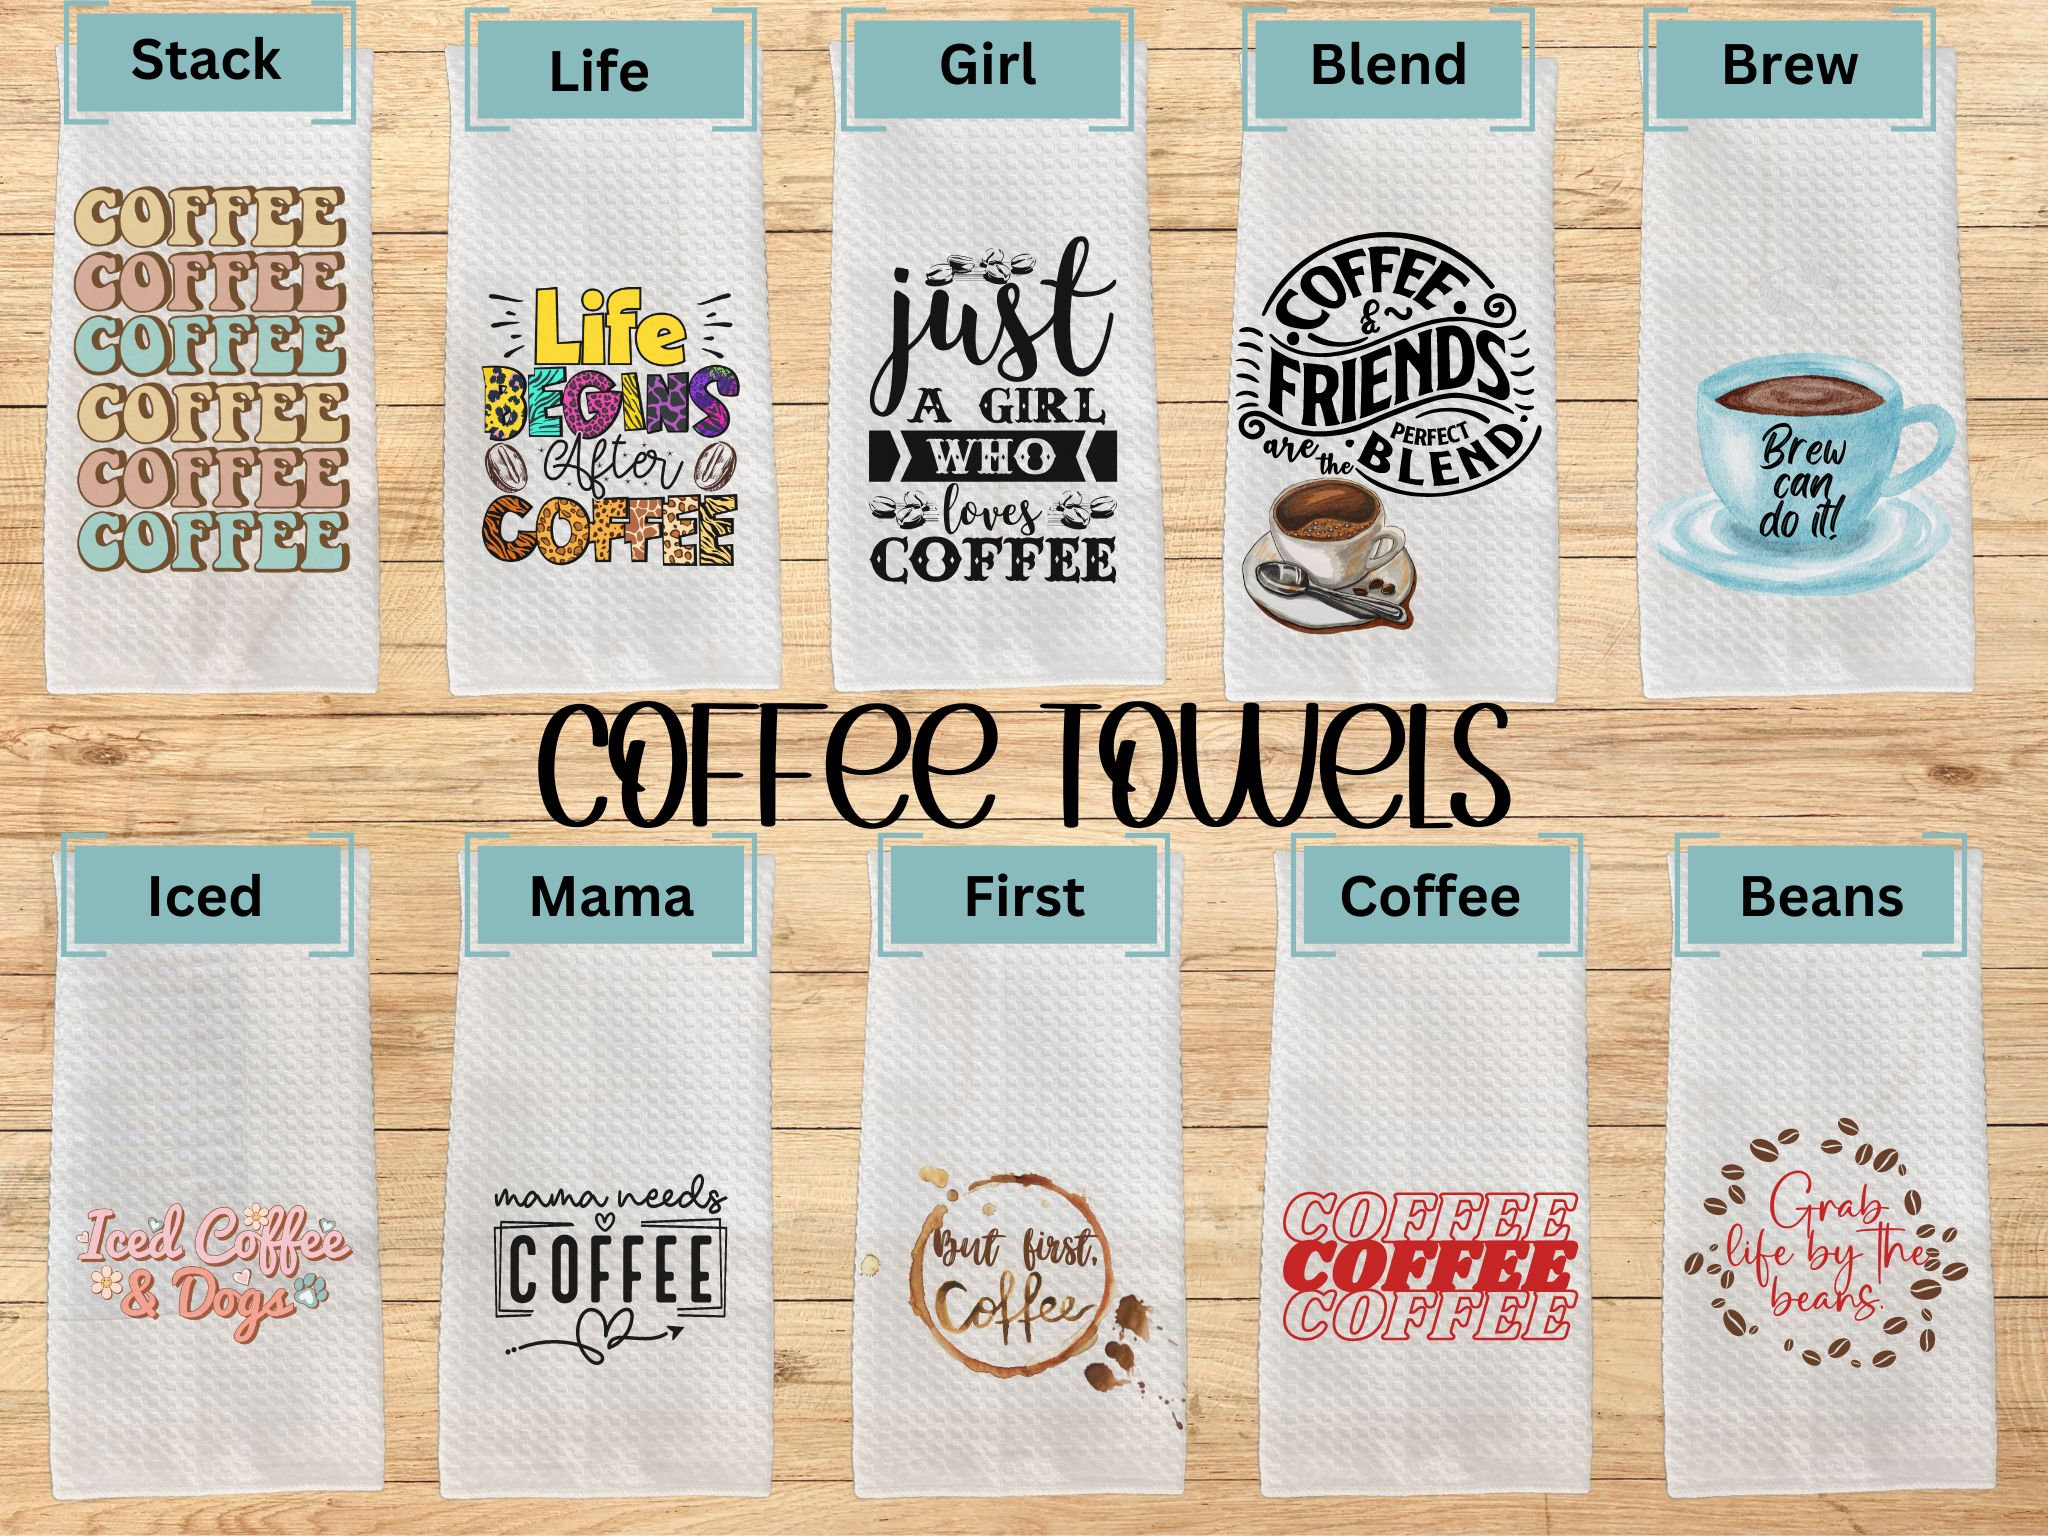 Lunch Money Dish Towels Set of 2 Decorative Coffee Theme Kitchen Towels  Hand Towel for Bathroom Decorative Set Everything Gets Better with Coffee